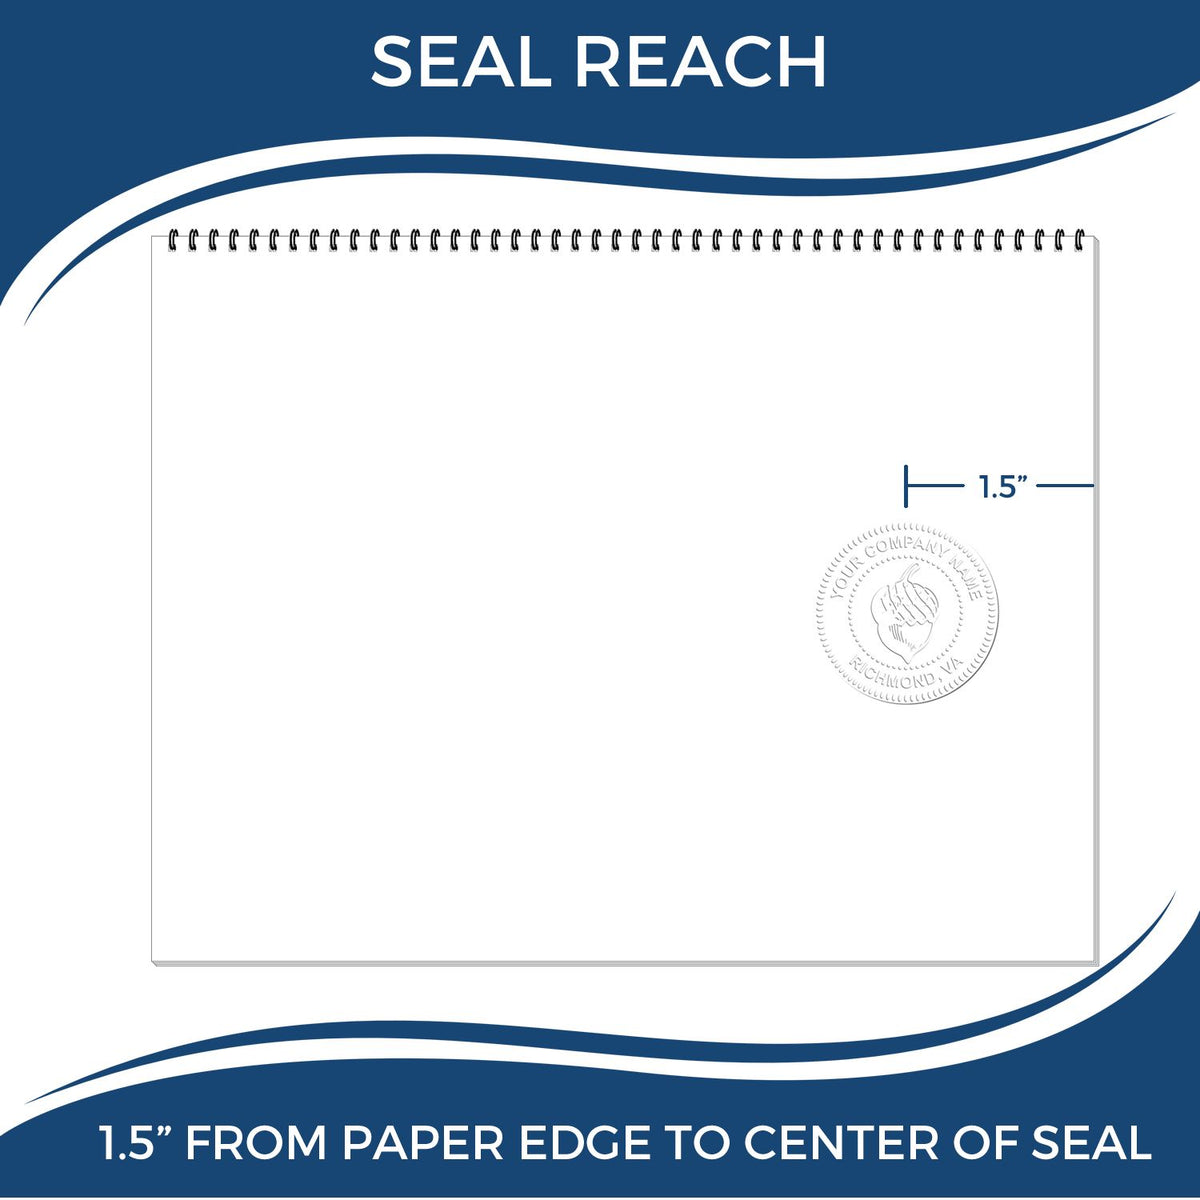 An infographic showing the seal reach which is represented by a ruler and a miniature seal image of the State of New Mexico Architectural Seal Embosser